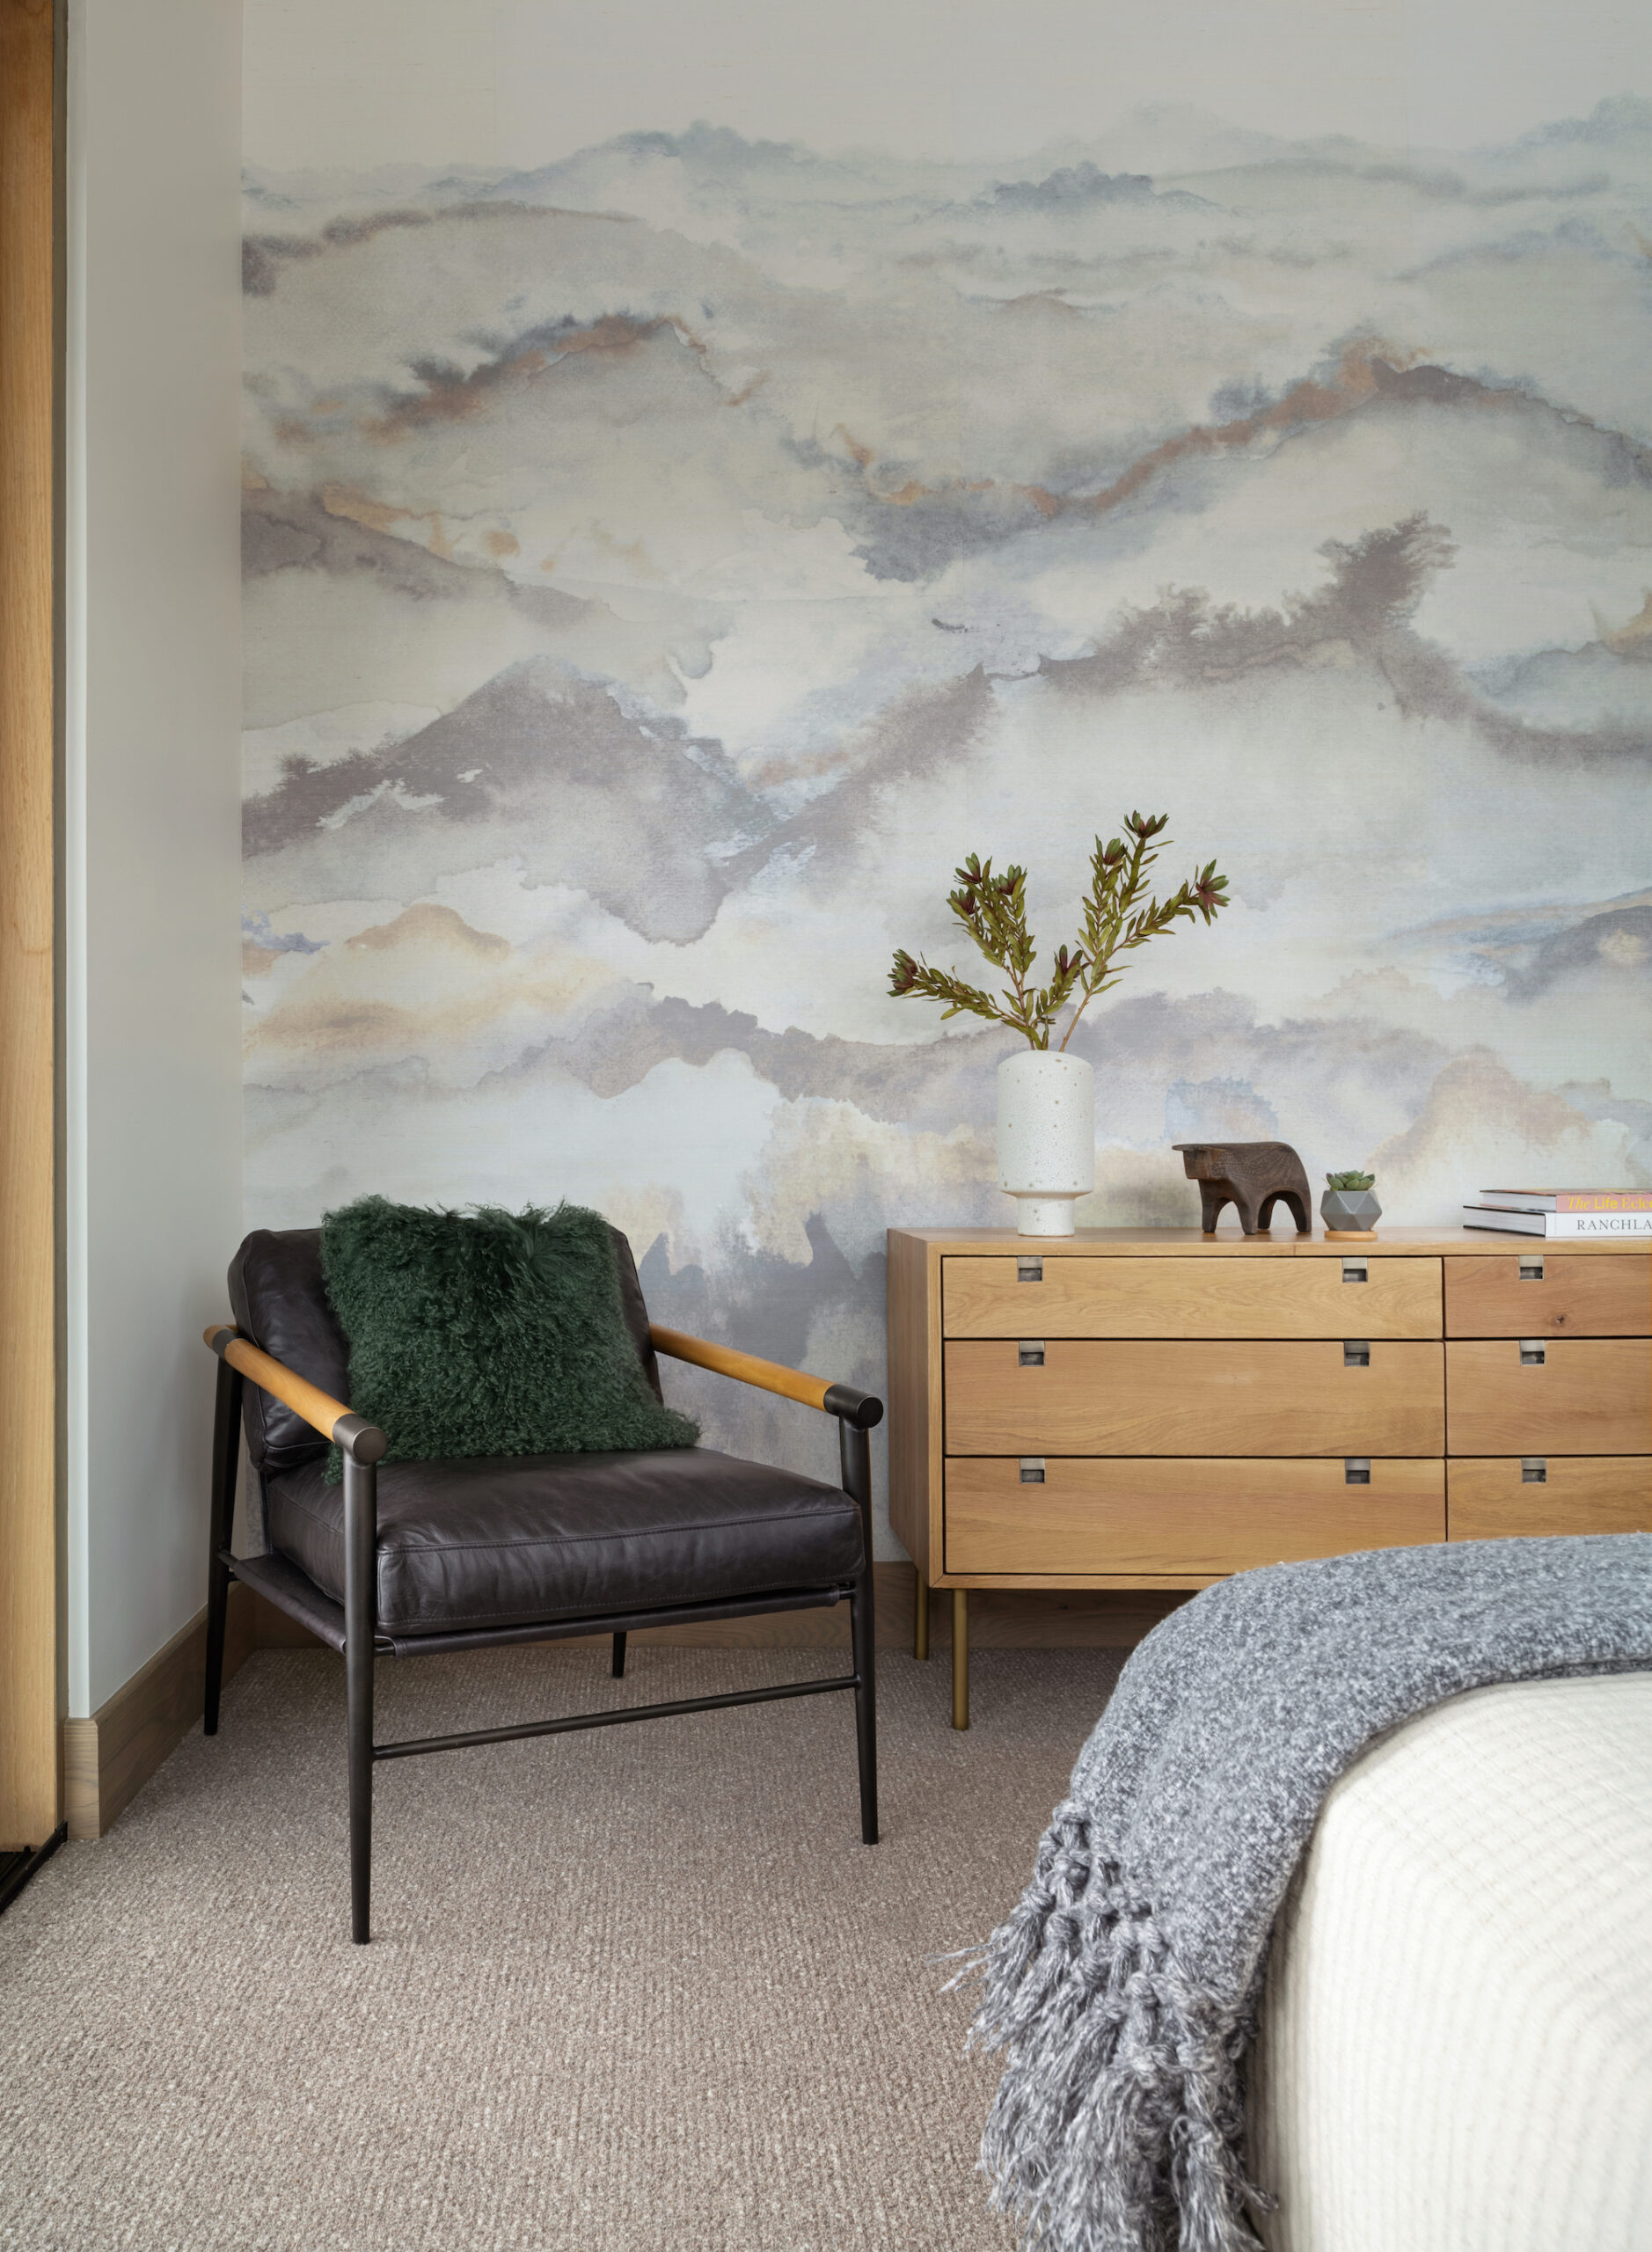 Guest bedroom with mountain wallpaper